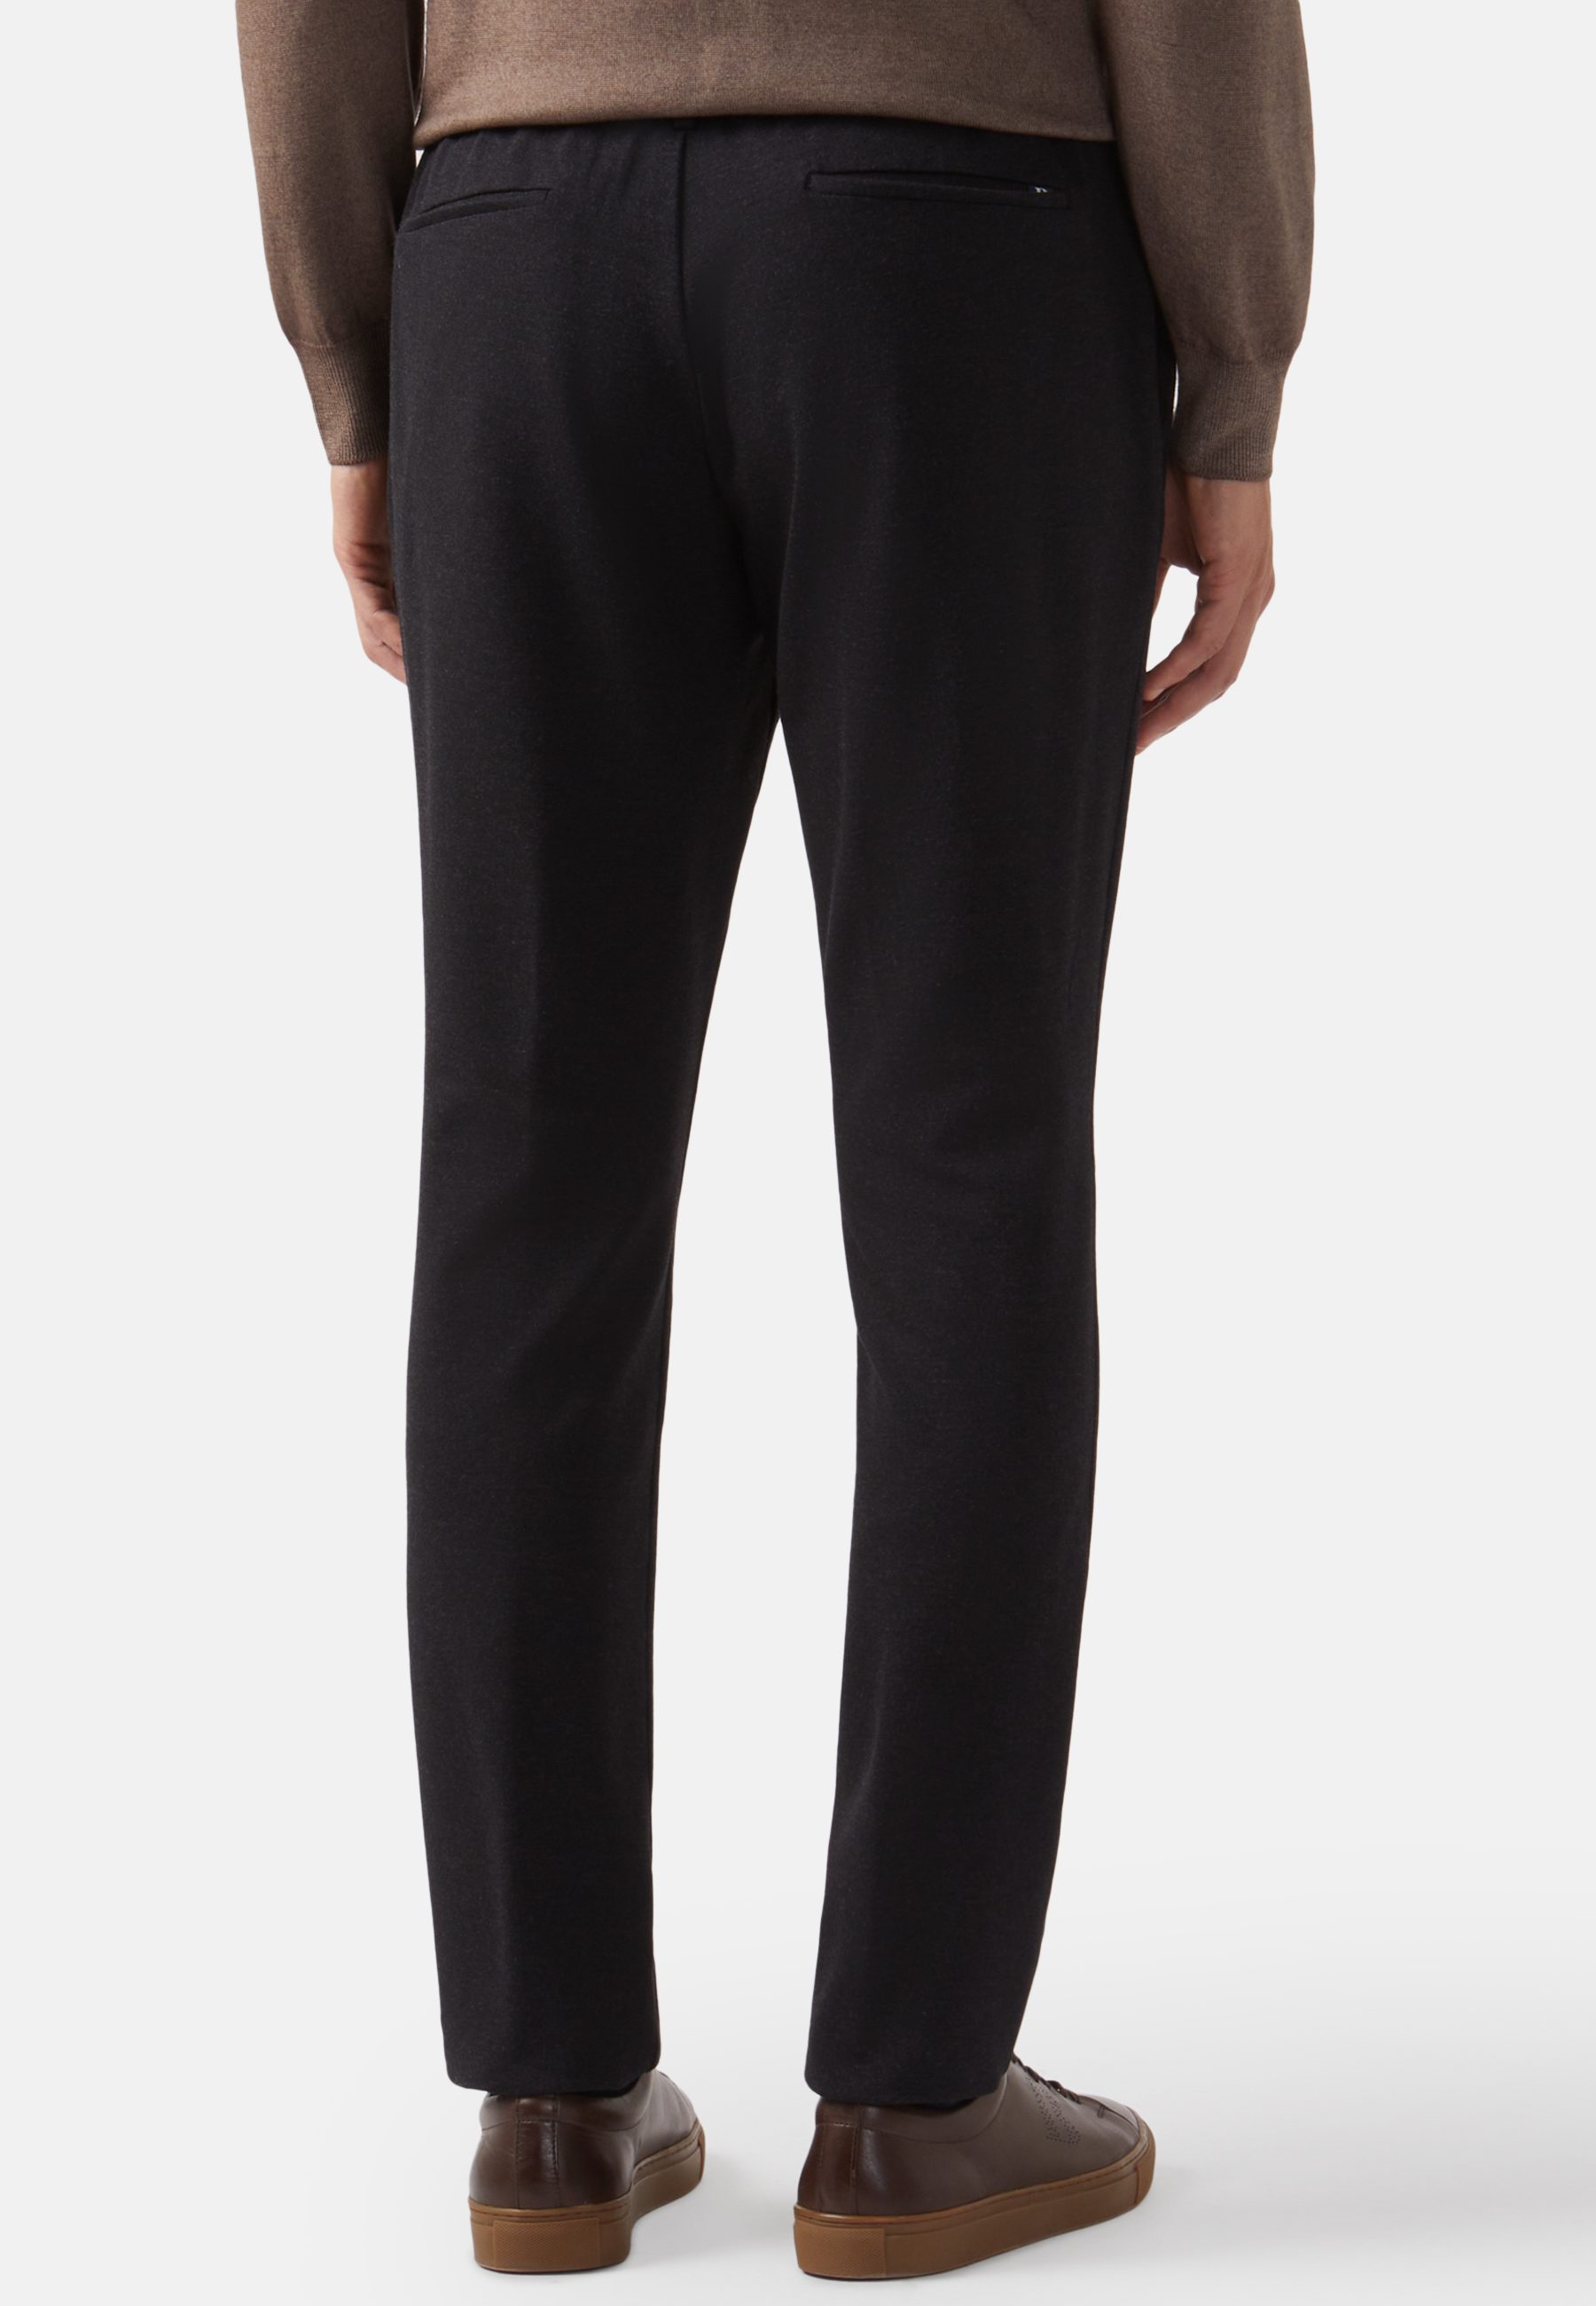 Men's Trousers in a Stretch Viscose and Nylon blend